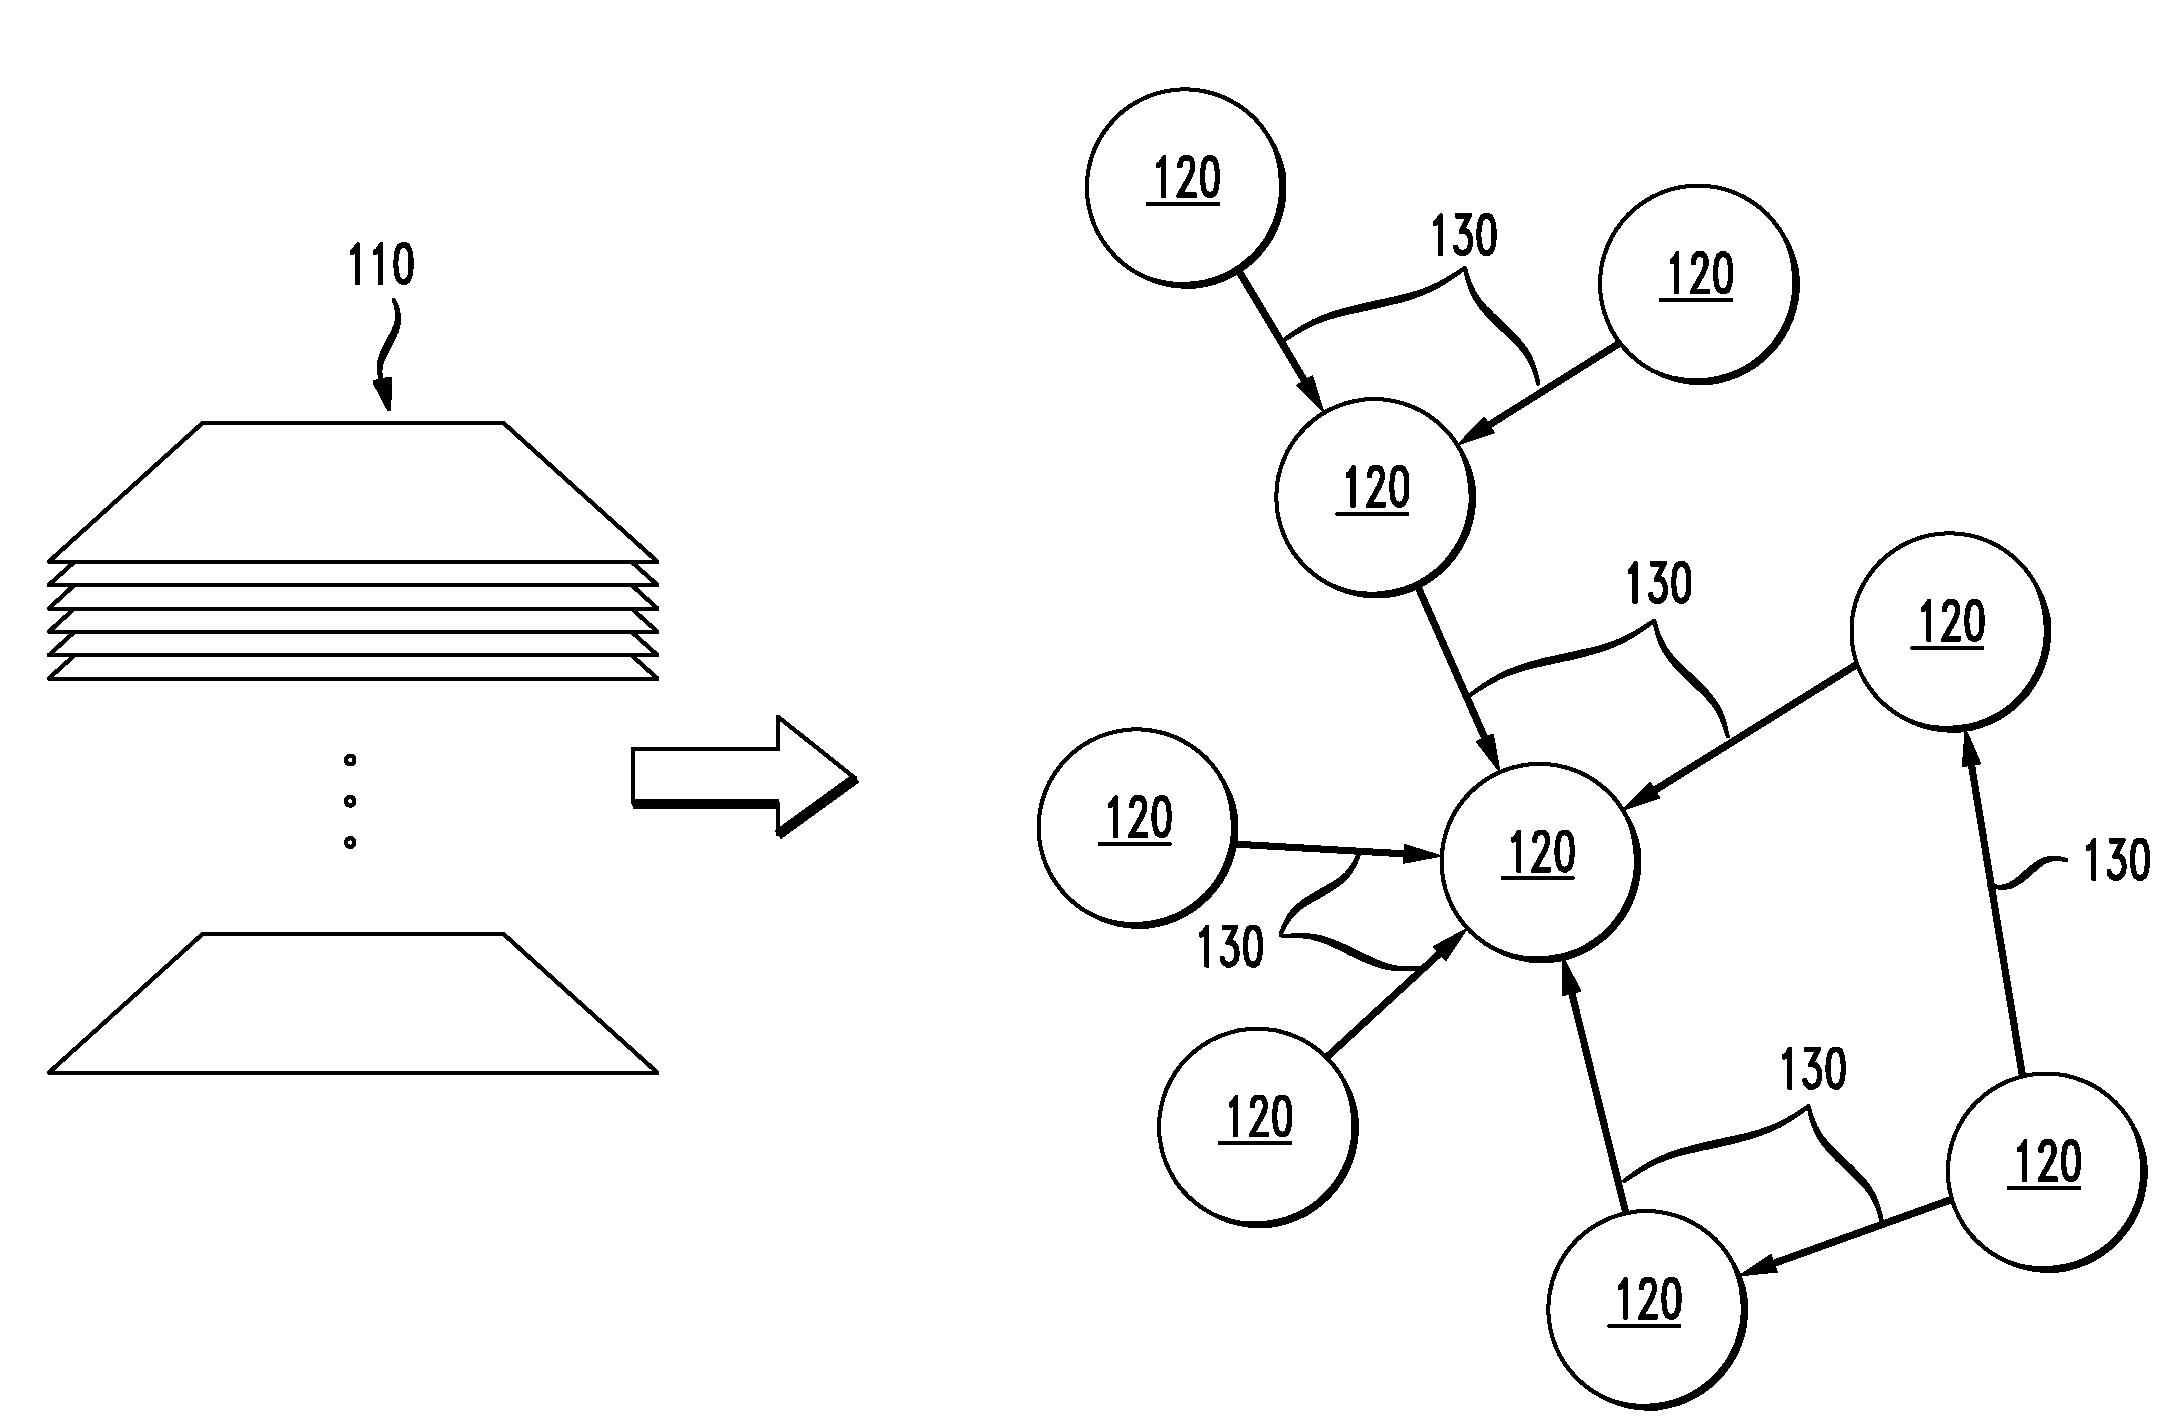 Link-based classification of graph nodes